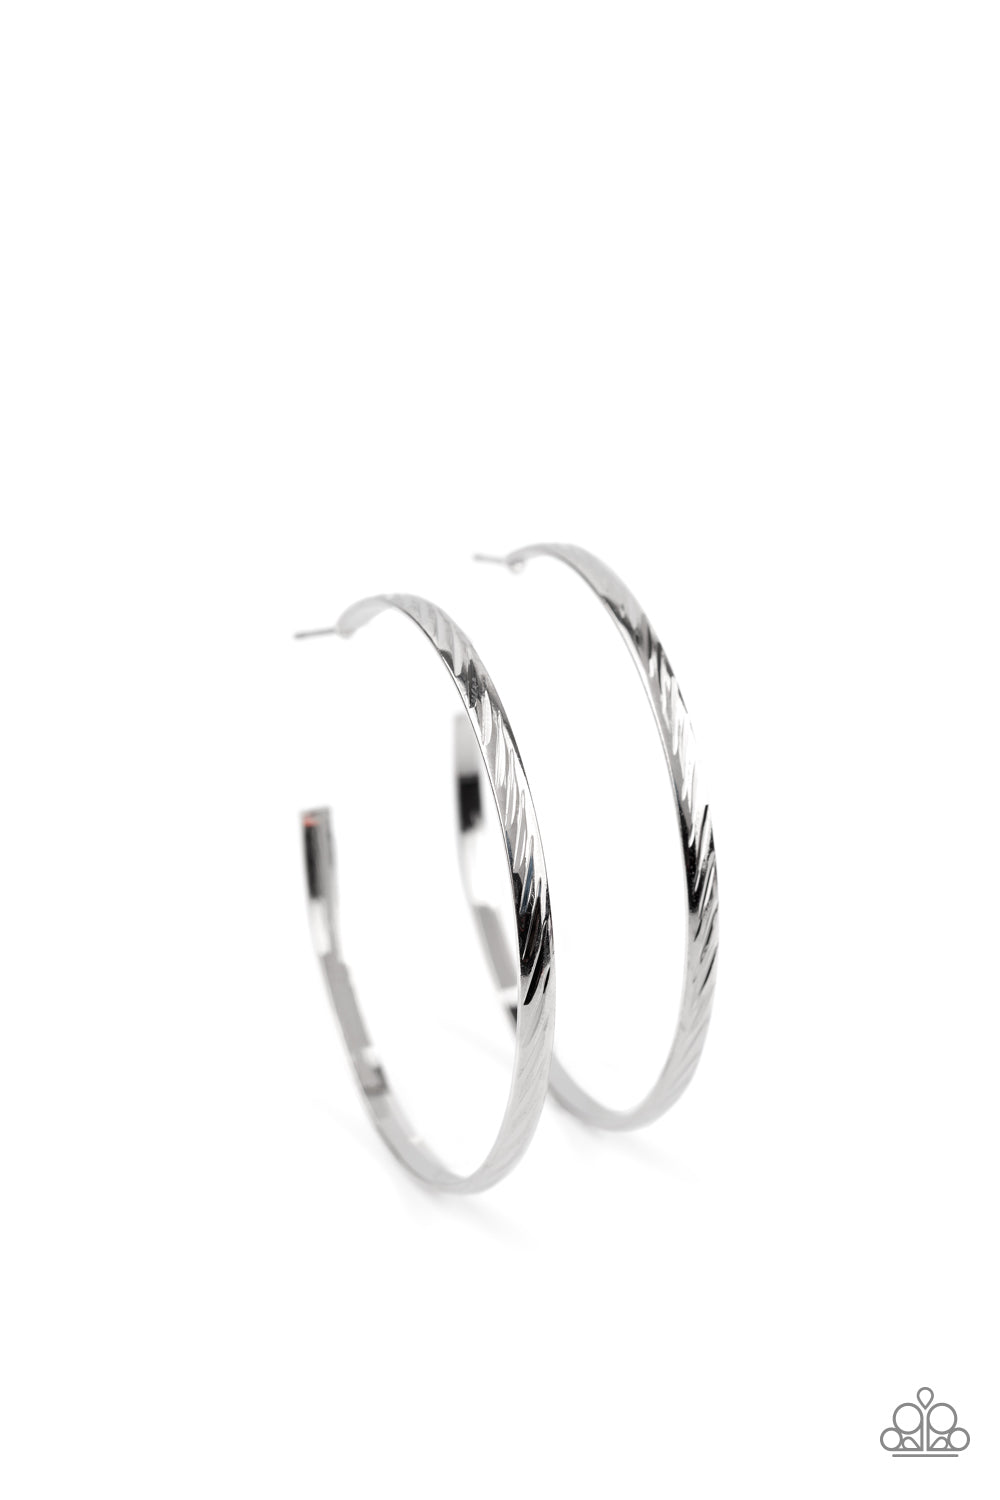 Reporting for Duty - Silver Hoops